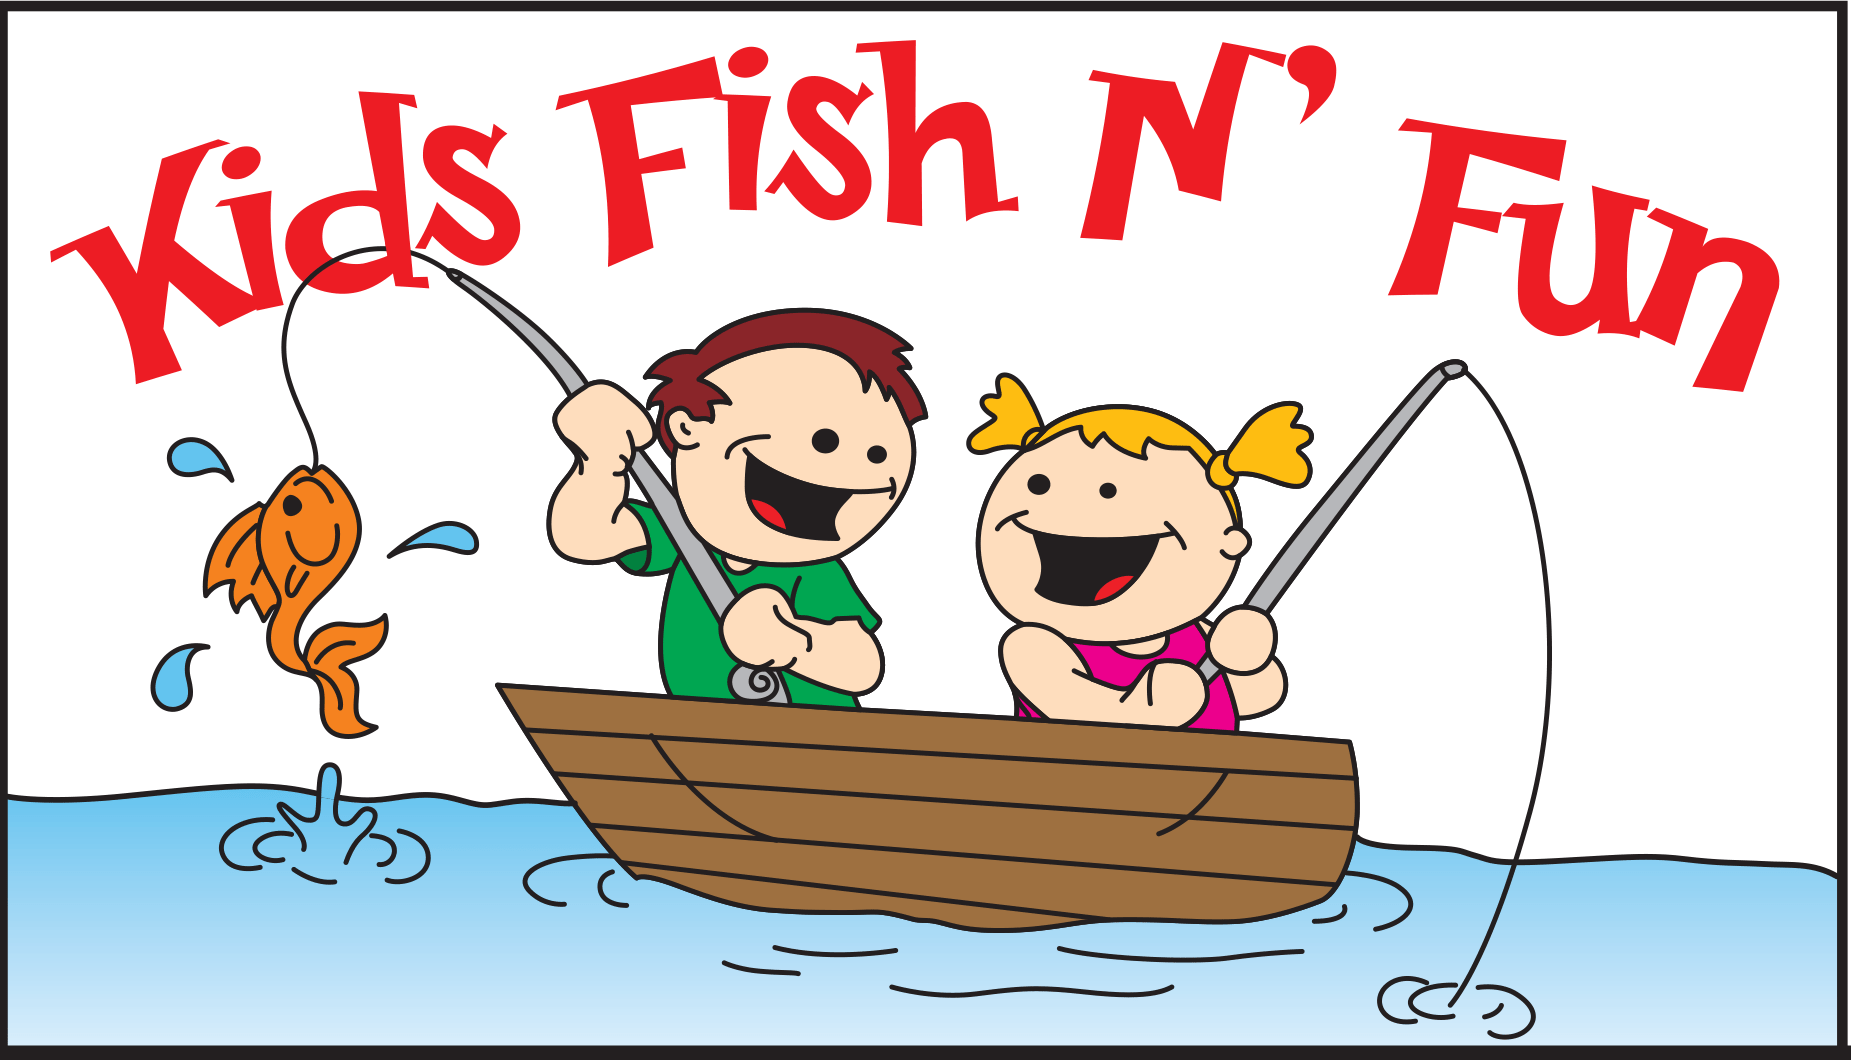 Illustration of a boy and a girl in a boat fishing